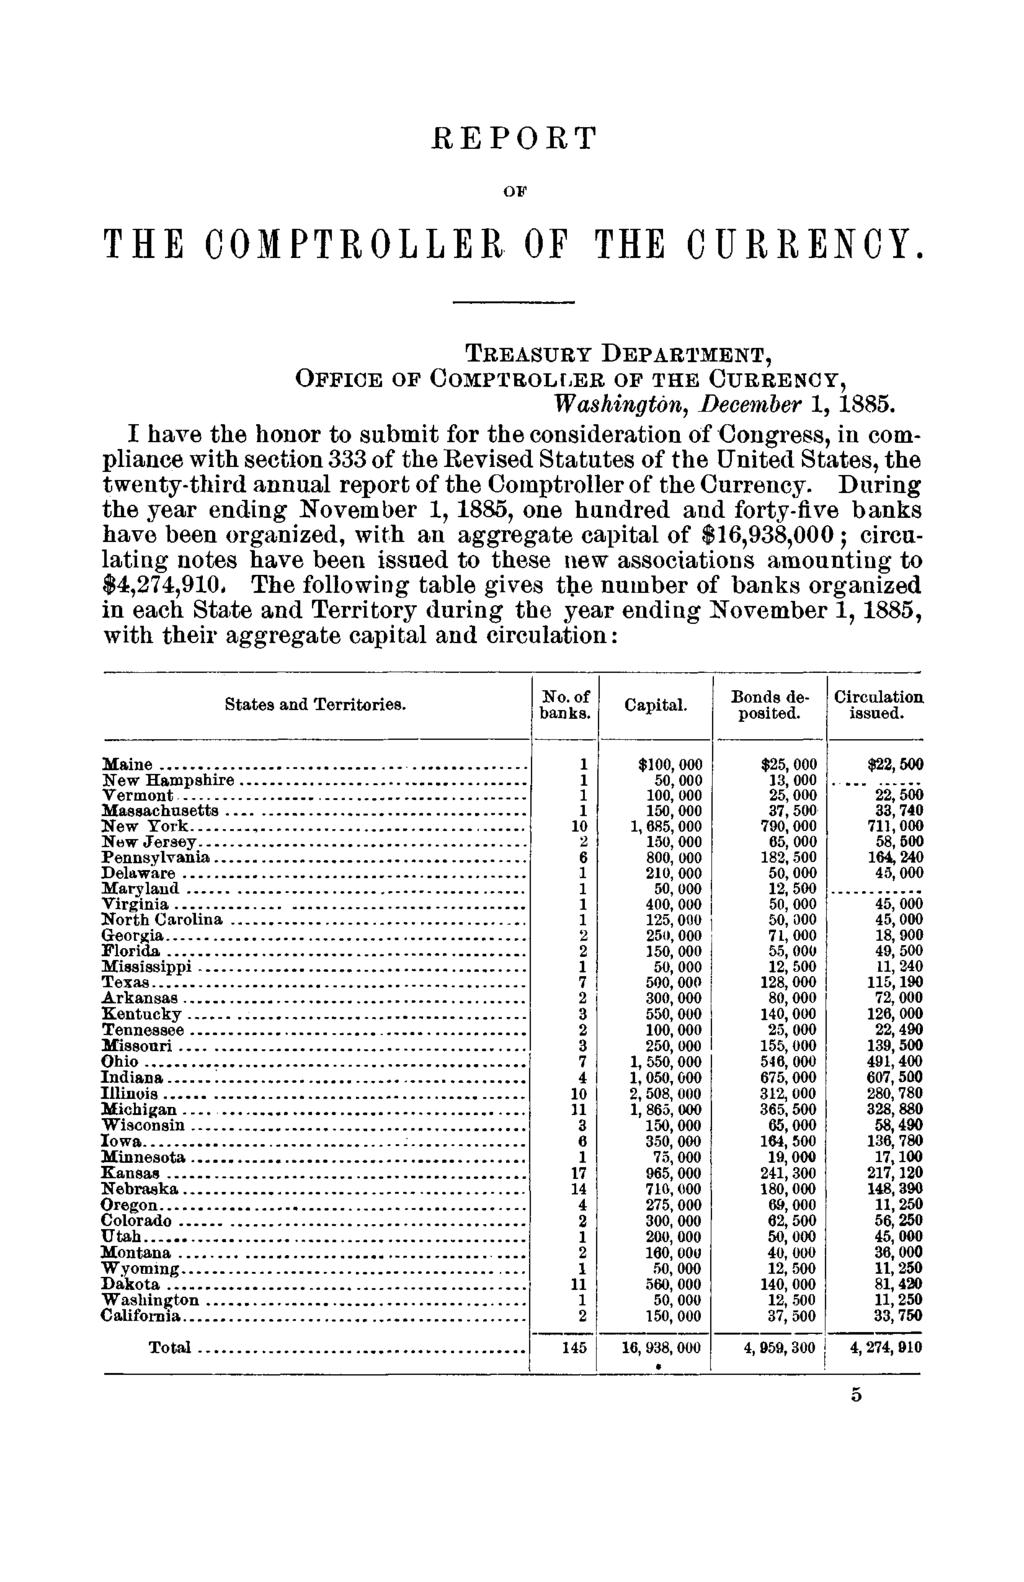 EEPORT THE COMPTROLLER OF THE CURRENCY. TREASURY DEPARTMENT, OFFICE OF COMPTROLLER OF THE CURRENCY, Washington, December 1, 1885.